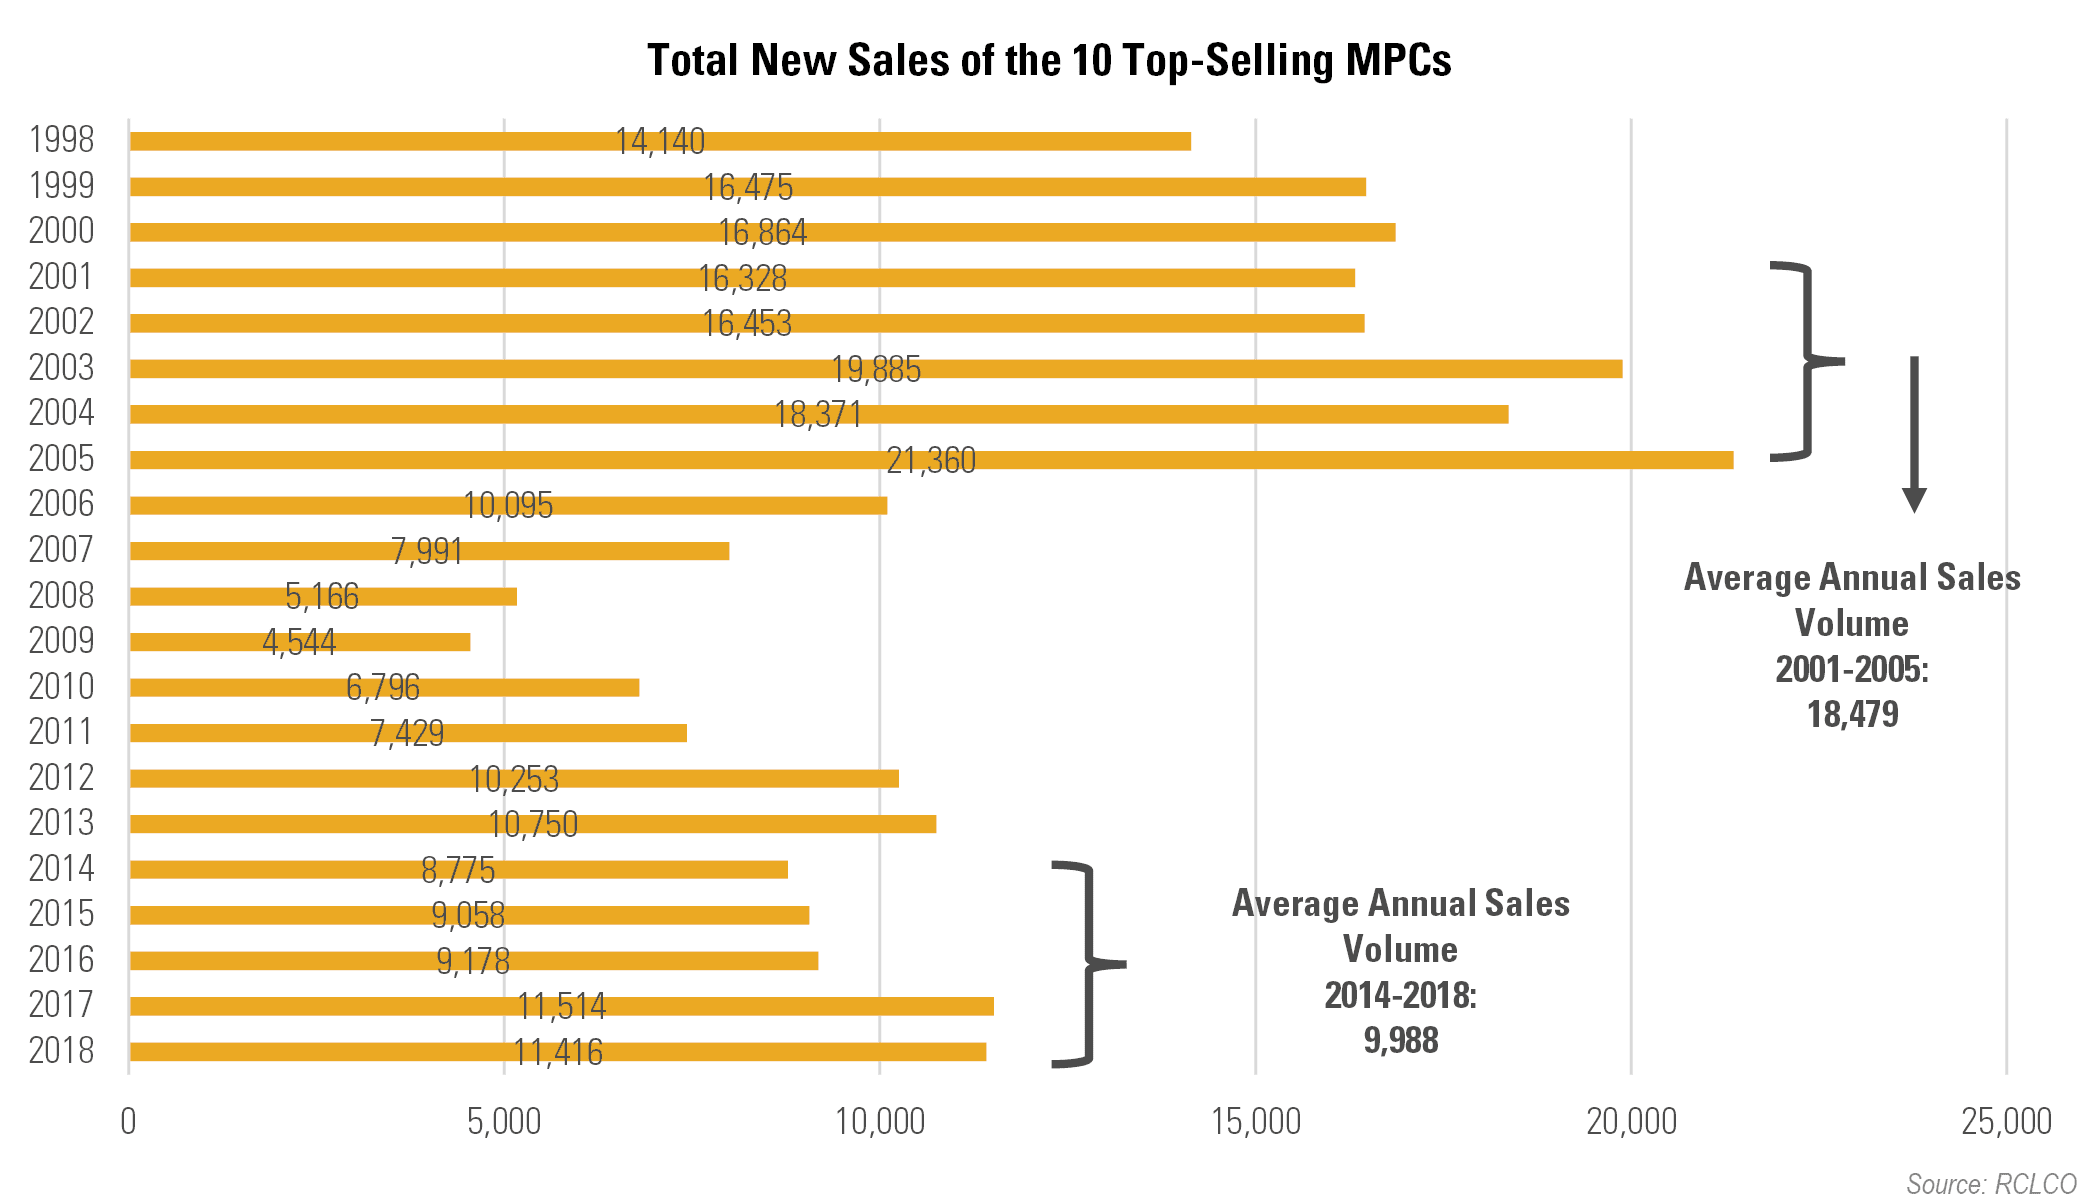 Advisory-Top-Selling-MPCs-Year-End-2018-Total-New-Sales